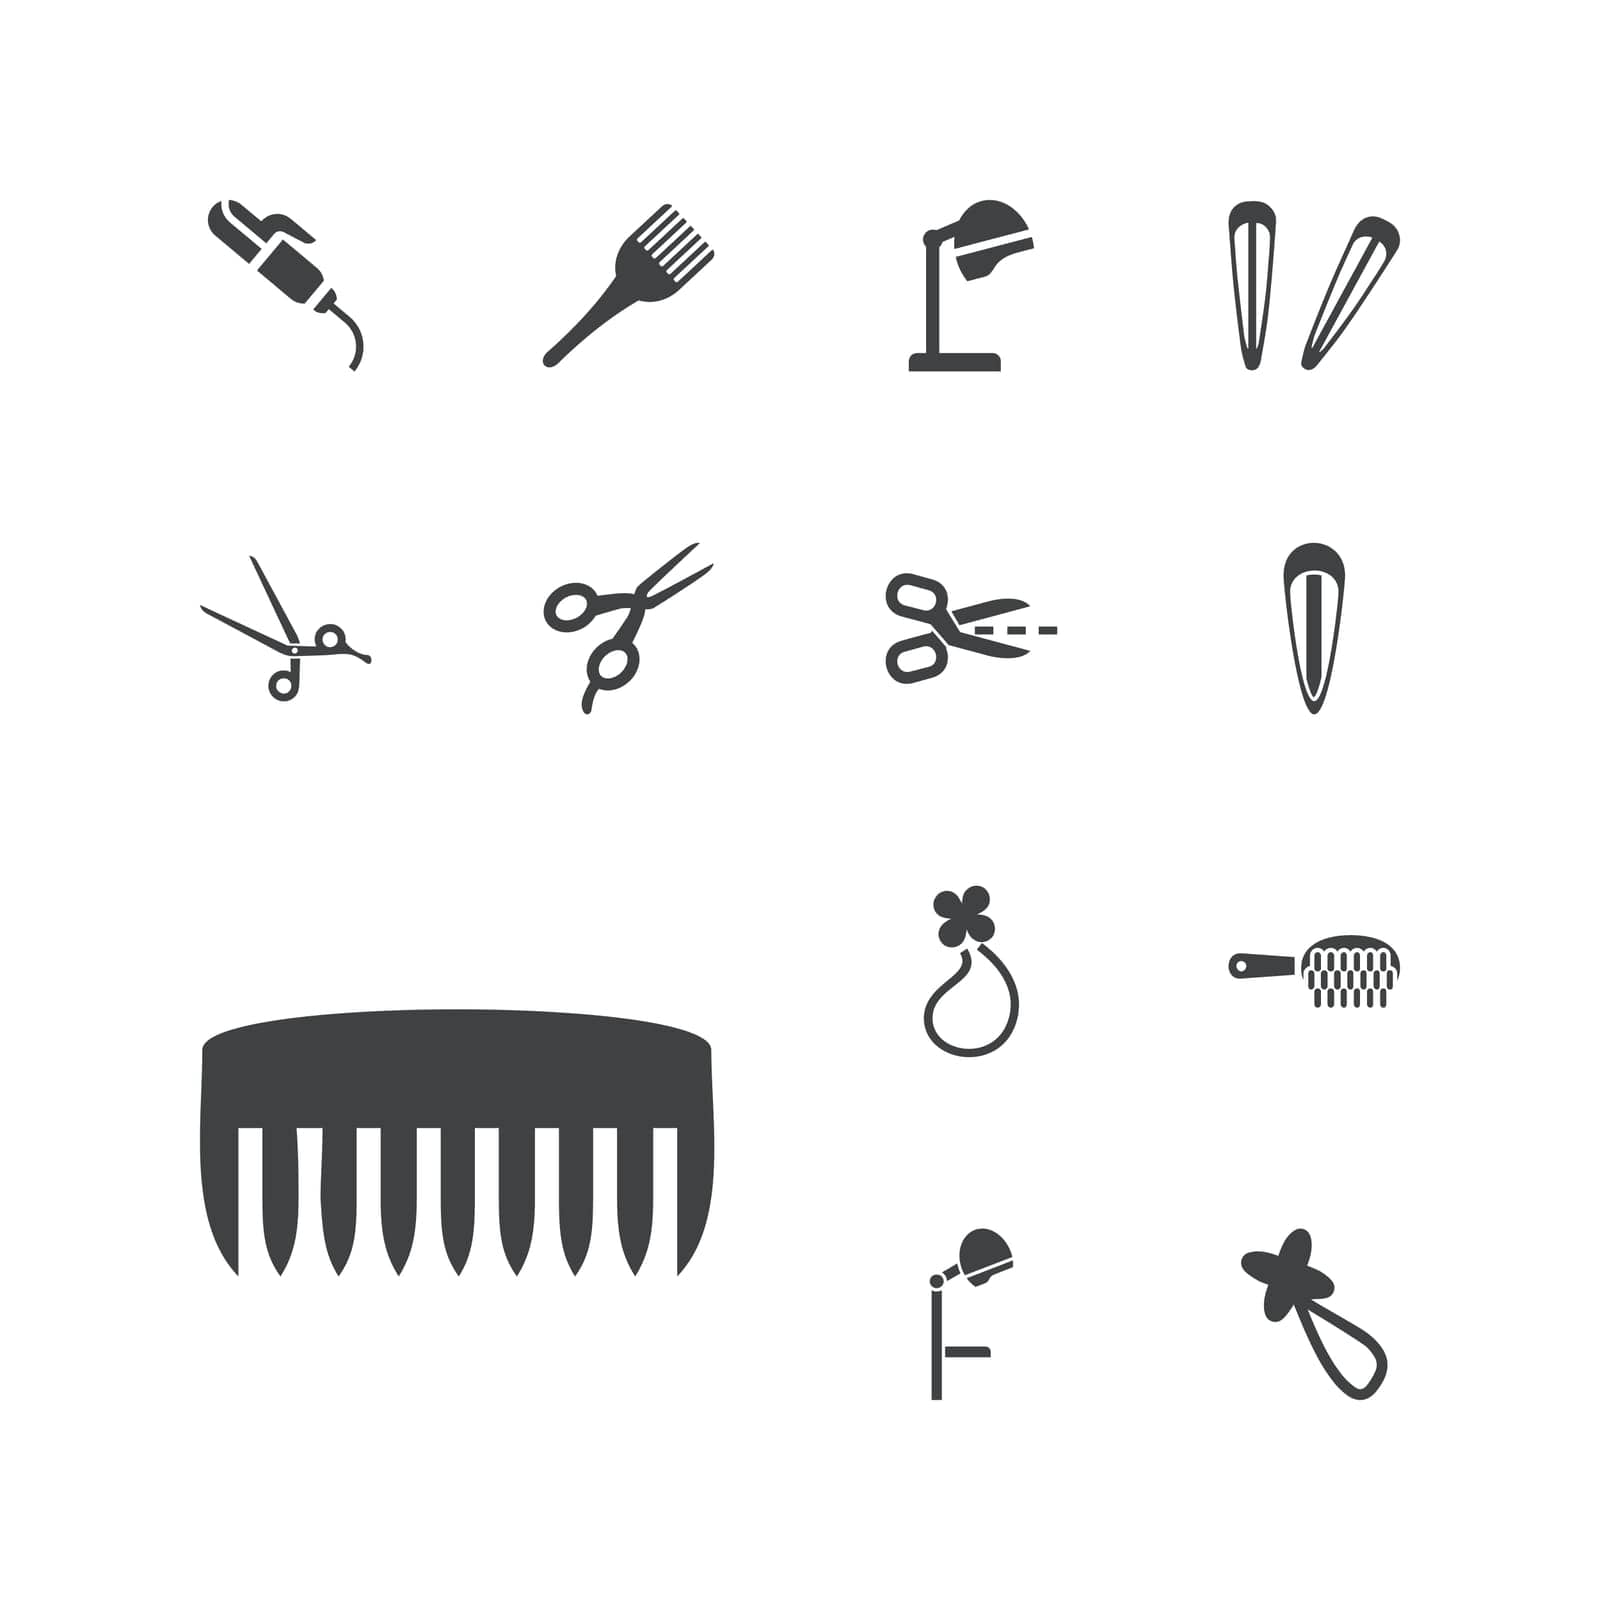 symbol,beauty,icon,sign,isolated,curler,hair,hairdresser,pin,white,design,coloring,vector,barber,element,brush,art,set,hairdressing,black,equipment,haircut,tool,dryer,comb,hairstyle,scissors,barrette,background,style,illustration,clip,object,fashion,care,salon by ogqcorp